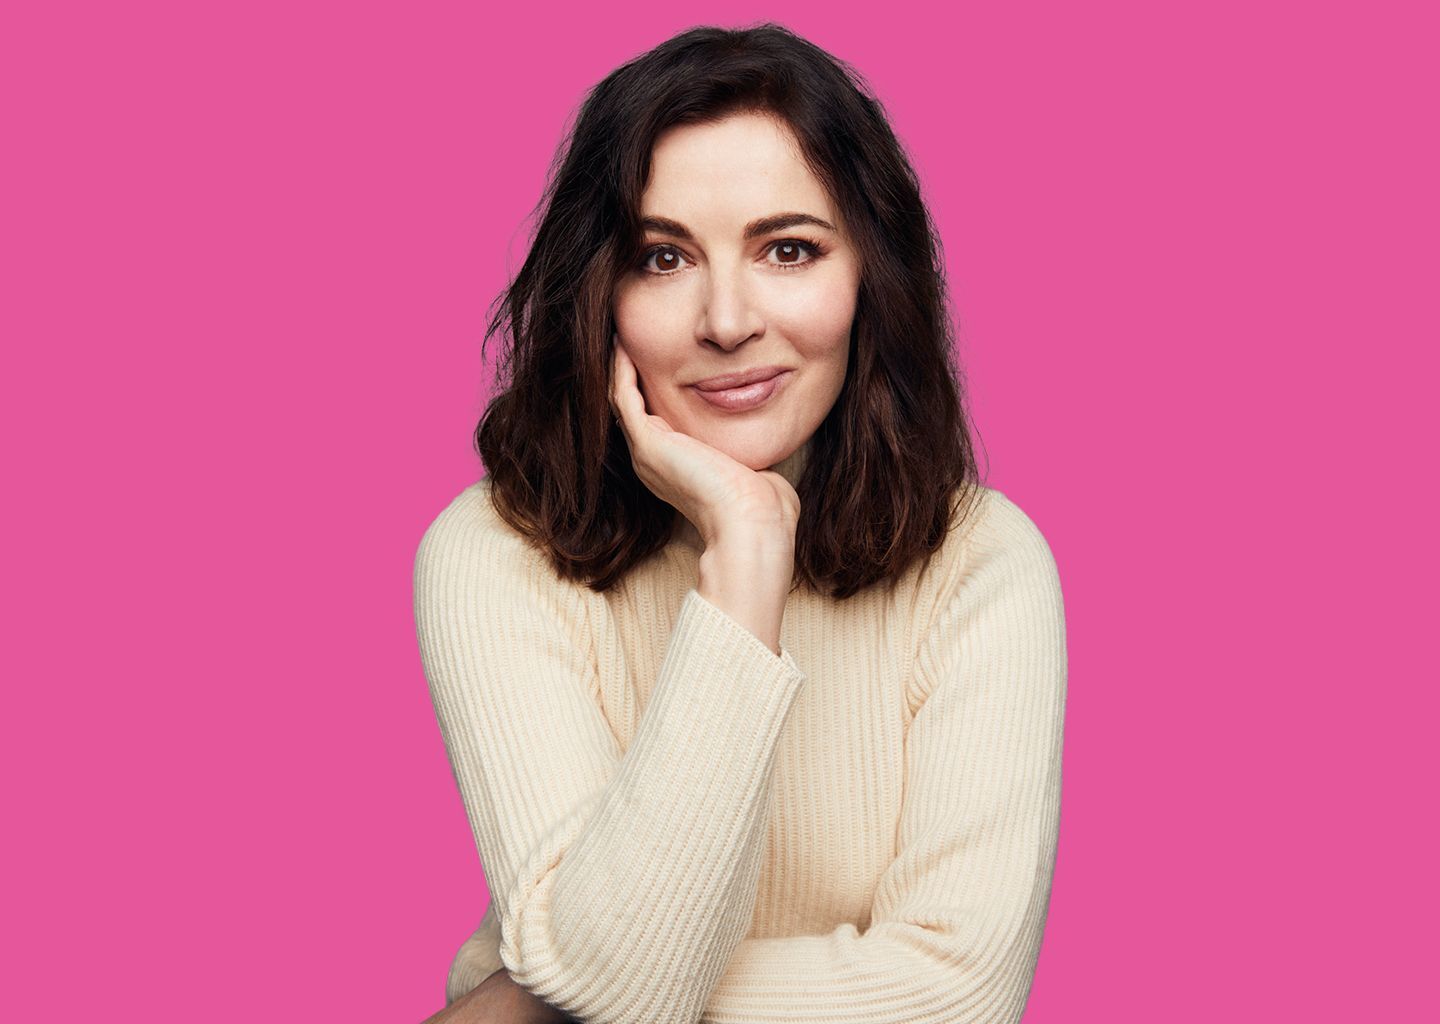 Food writer and cooking show host Nigella Lawson comes to Irvine